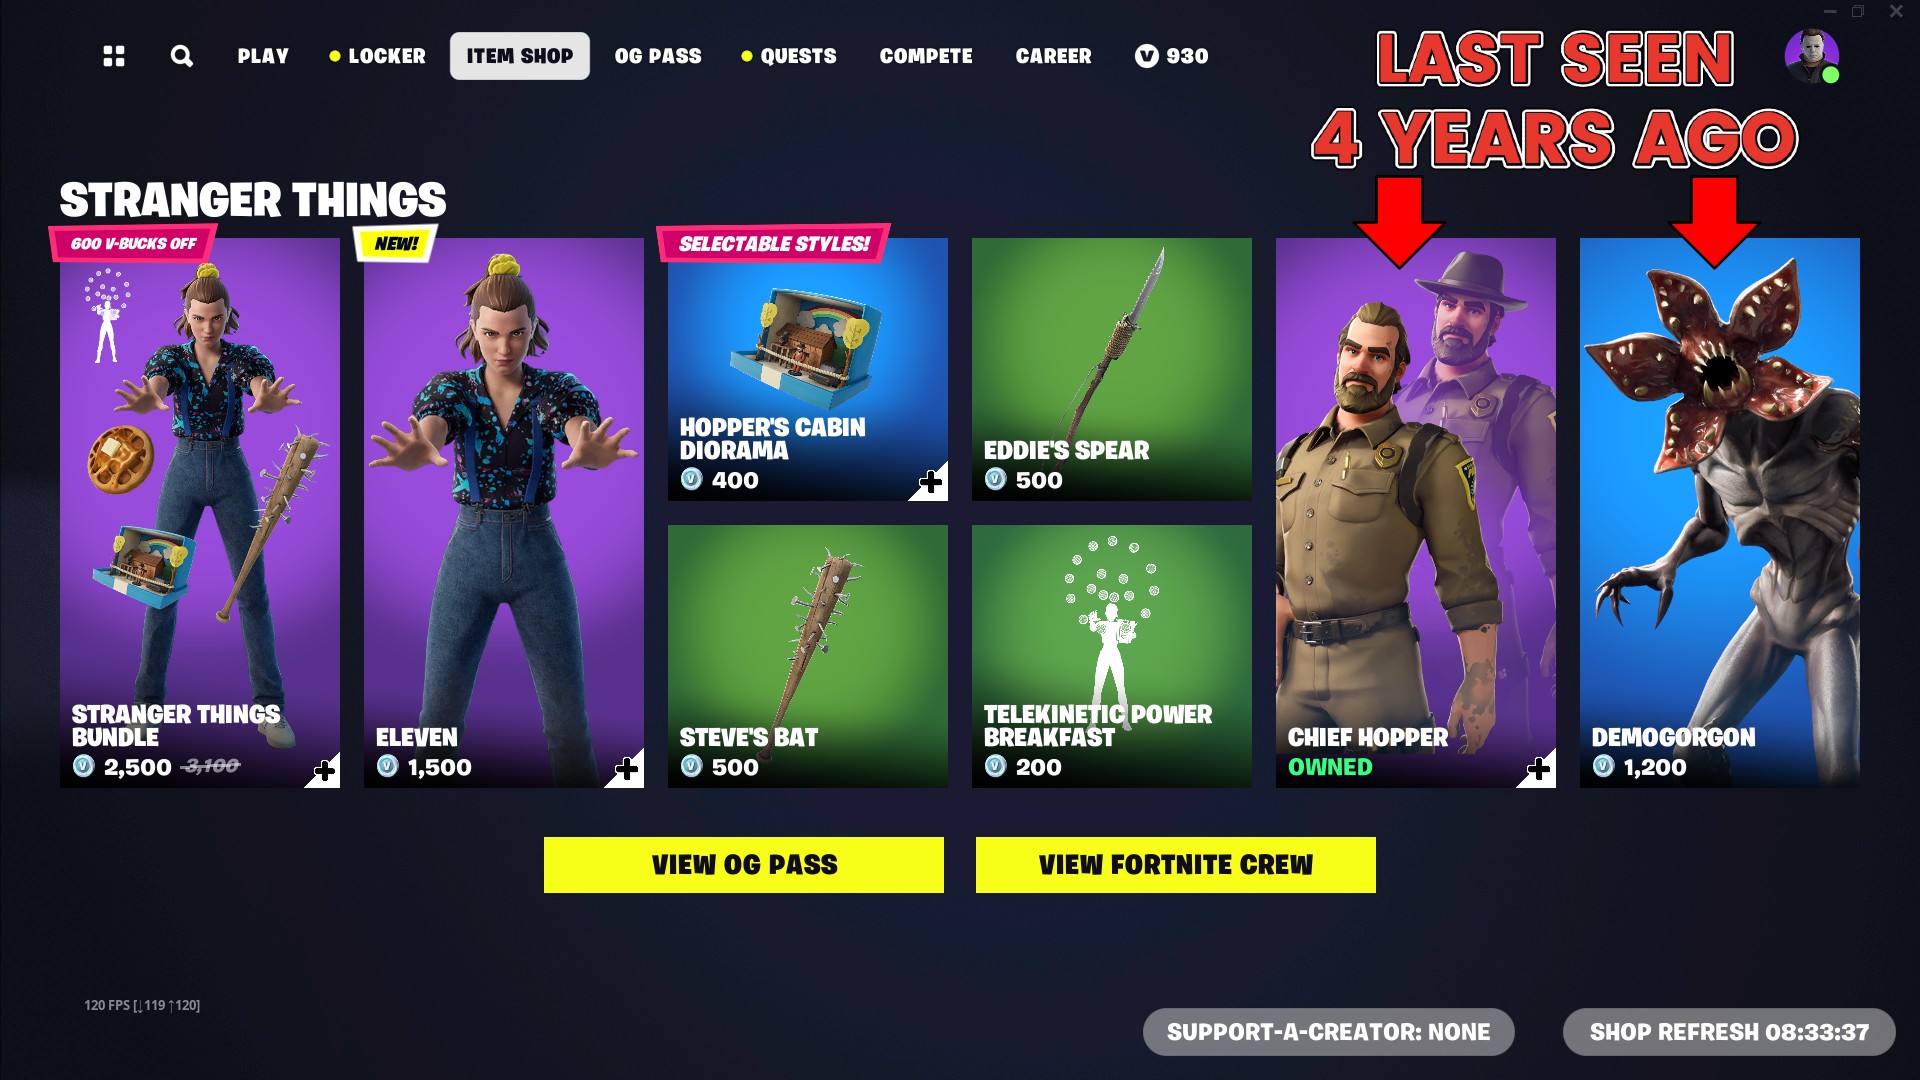 Fortnite Stranger Things skins have FINALLY returned after four years